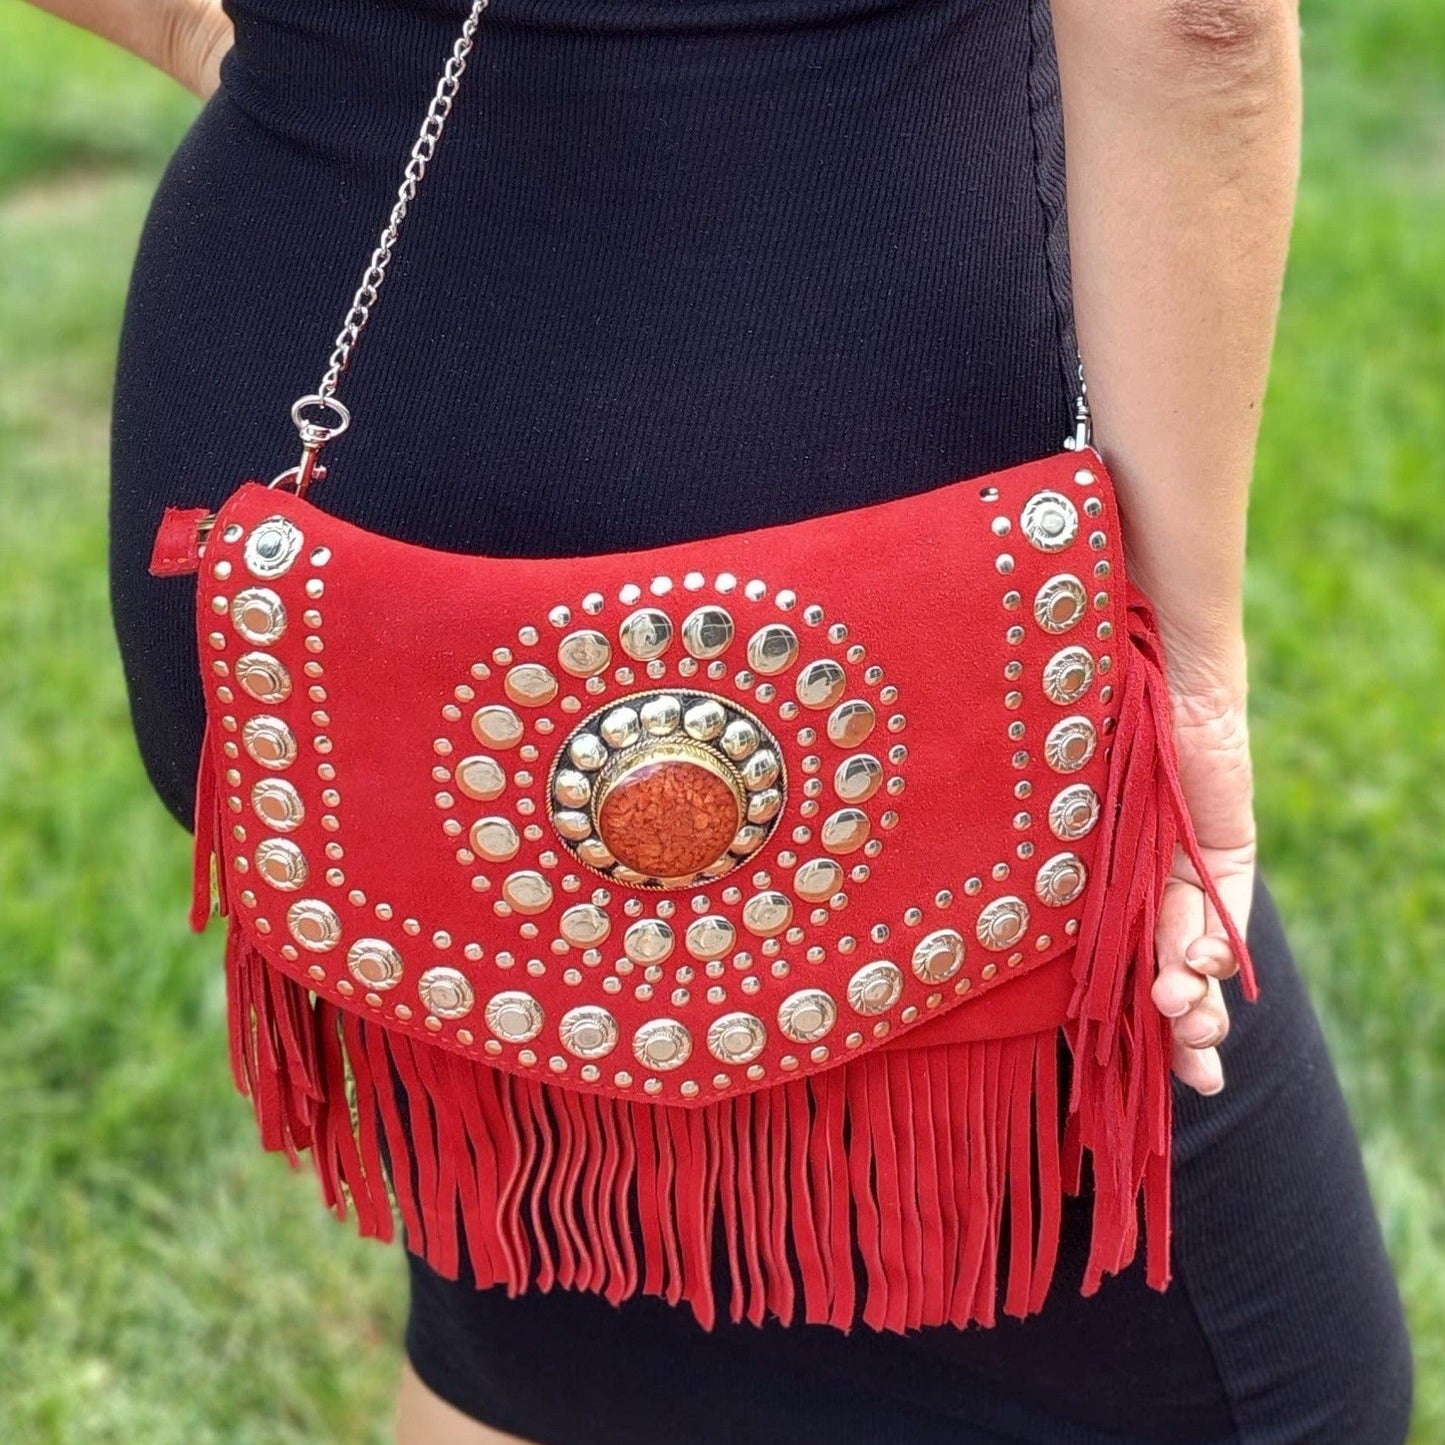 Moroccan Suede Clutch with Fringe